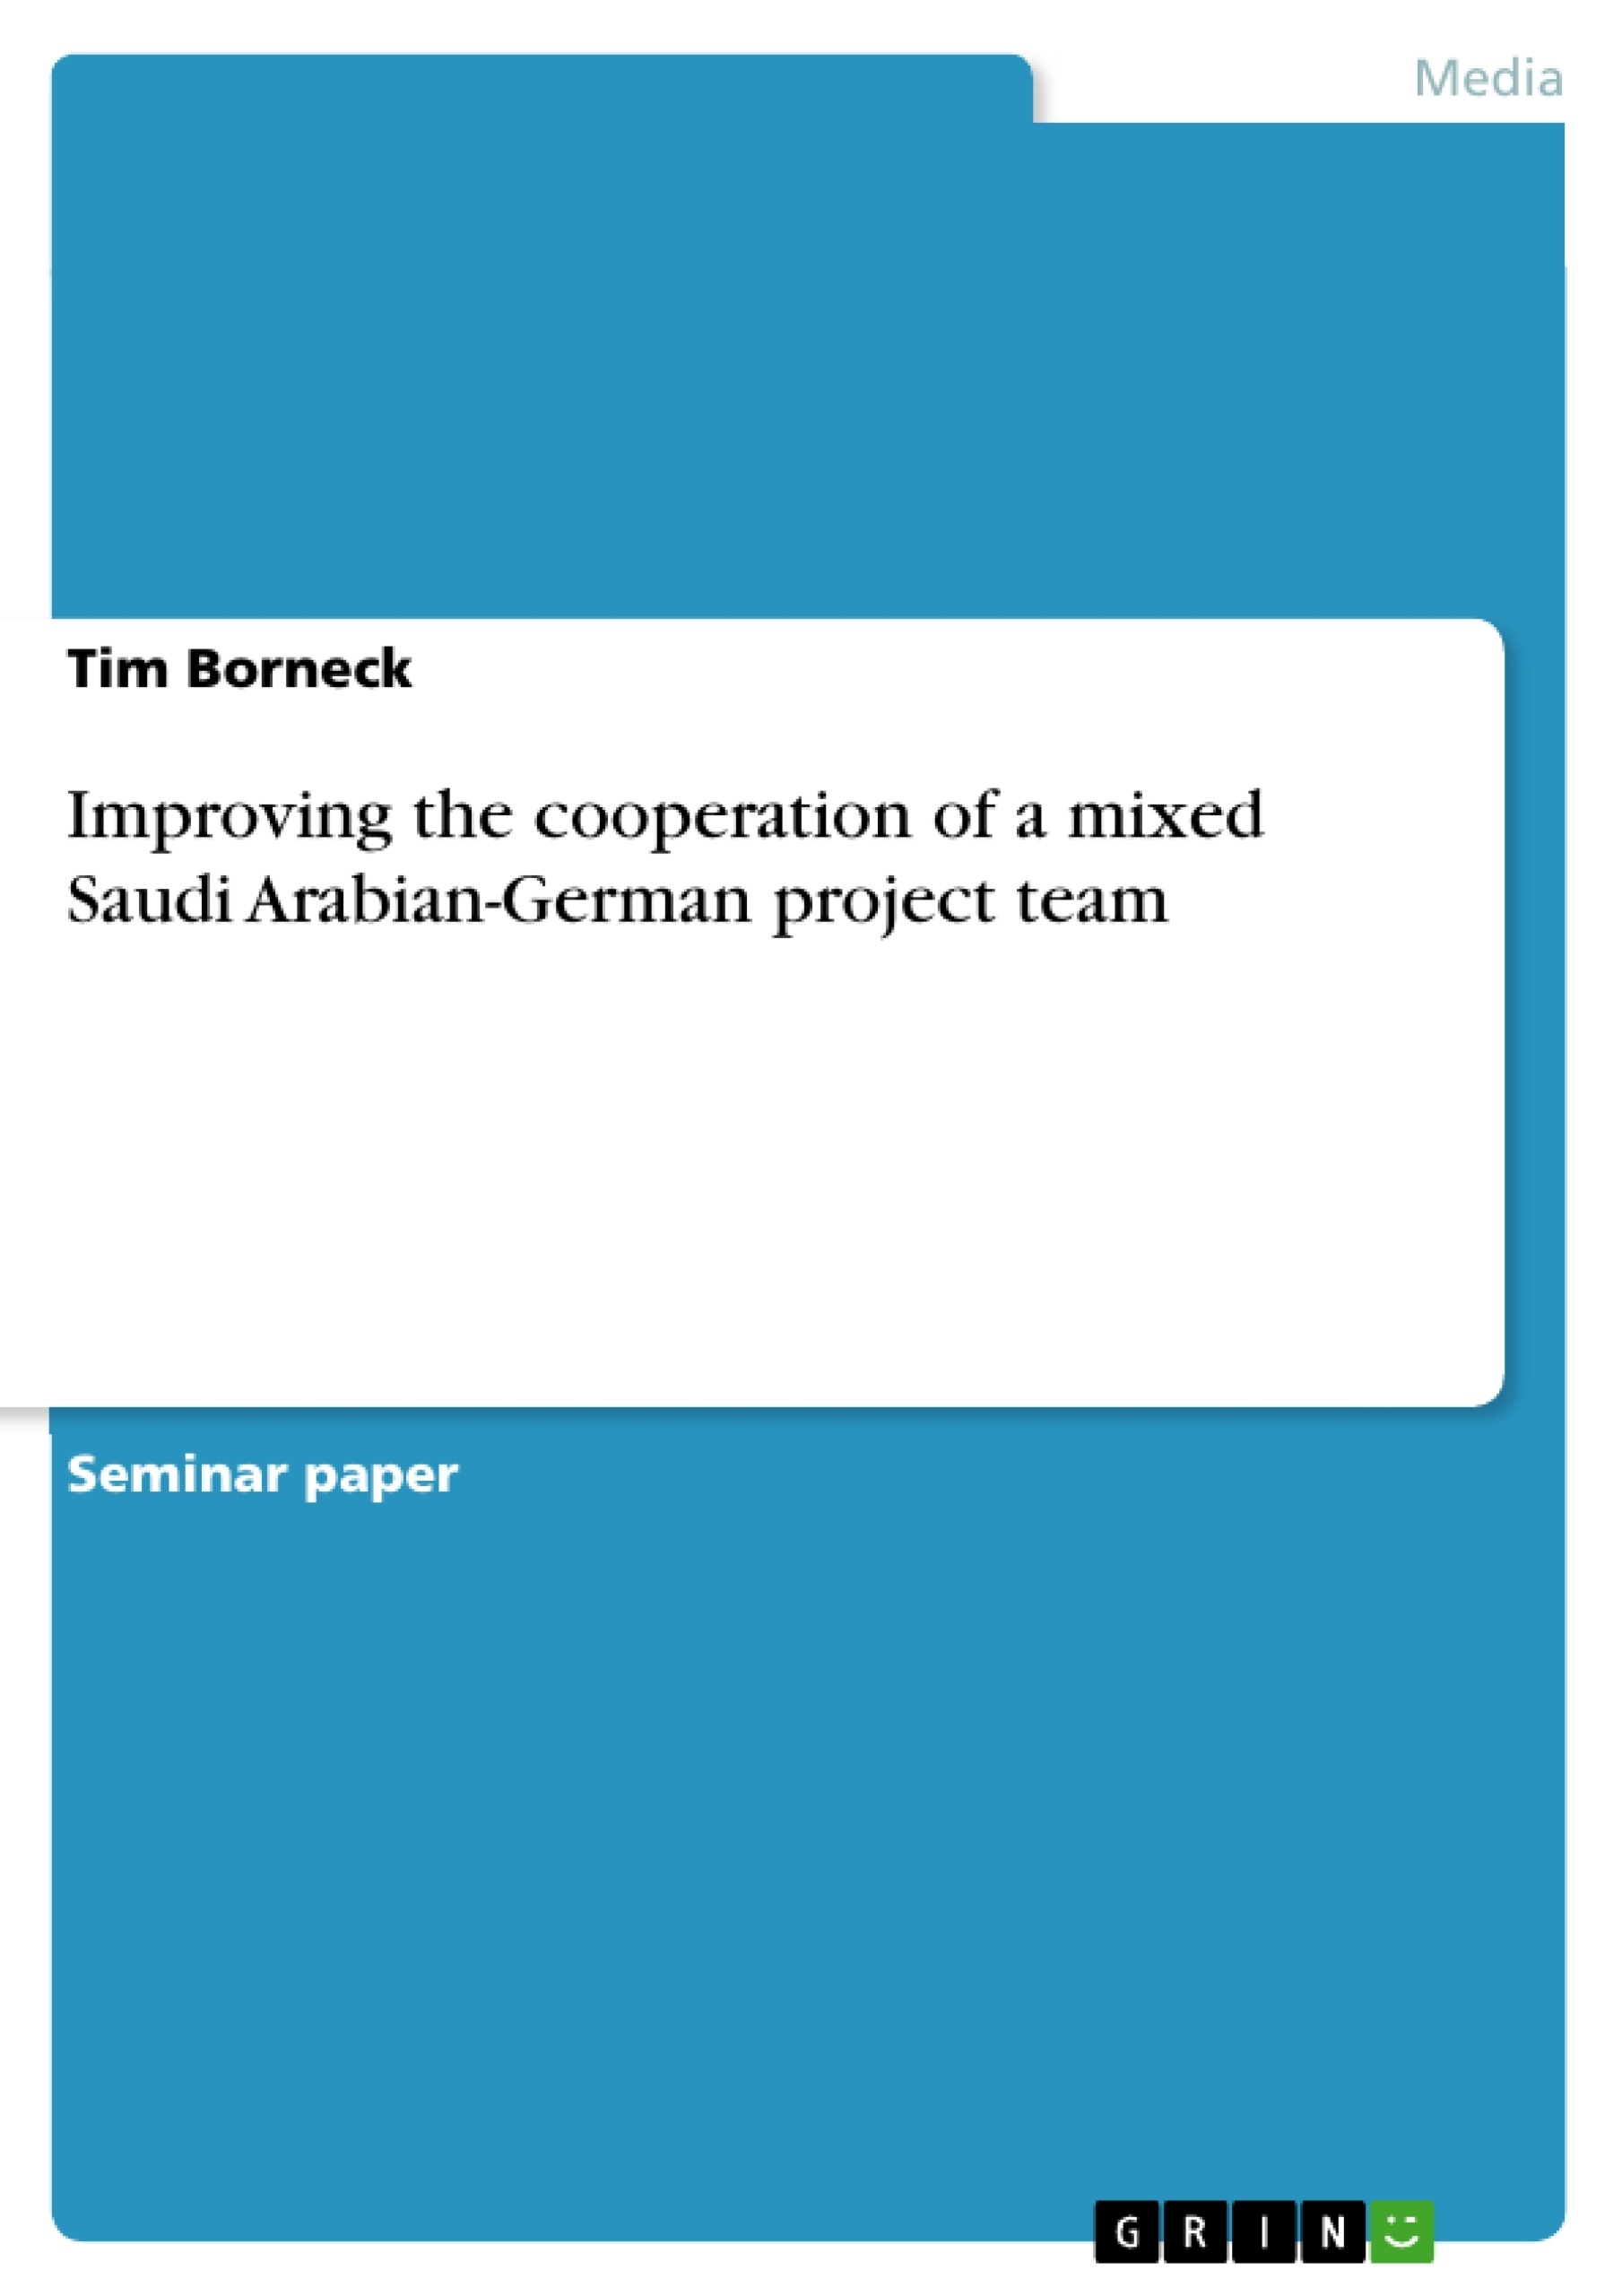 Title: Improving the cooperation of a mixed Saudi Arabian-German project team